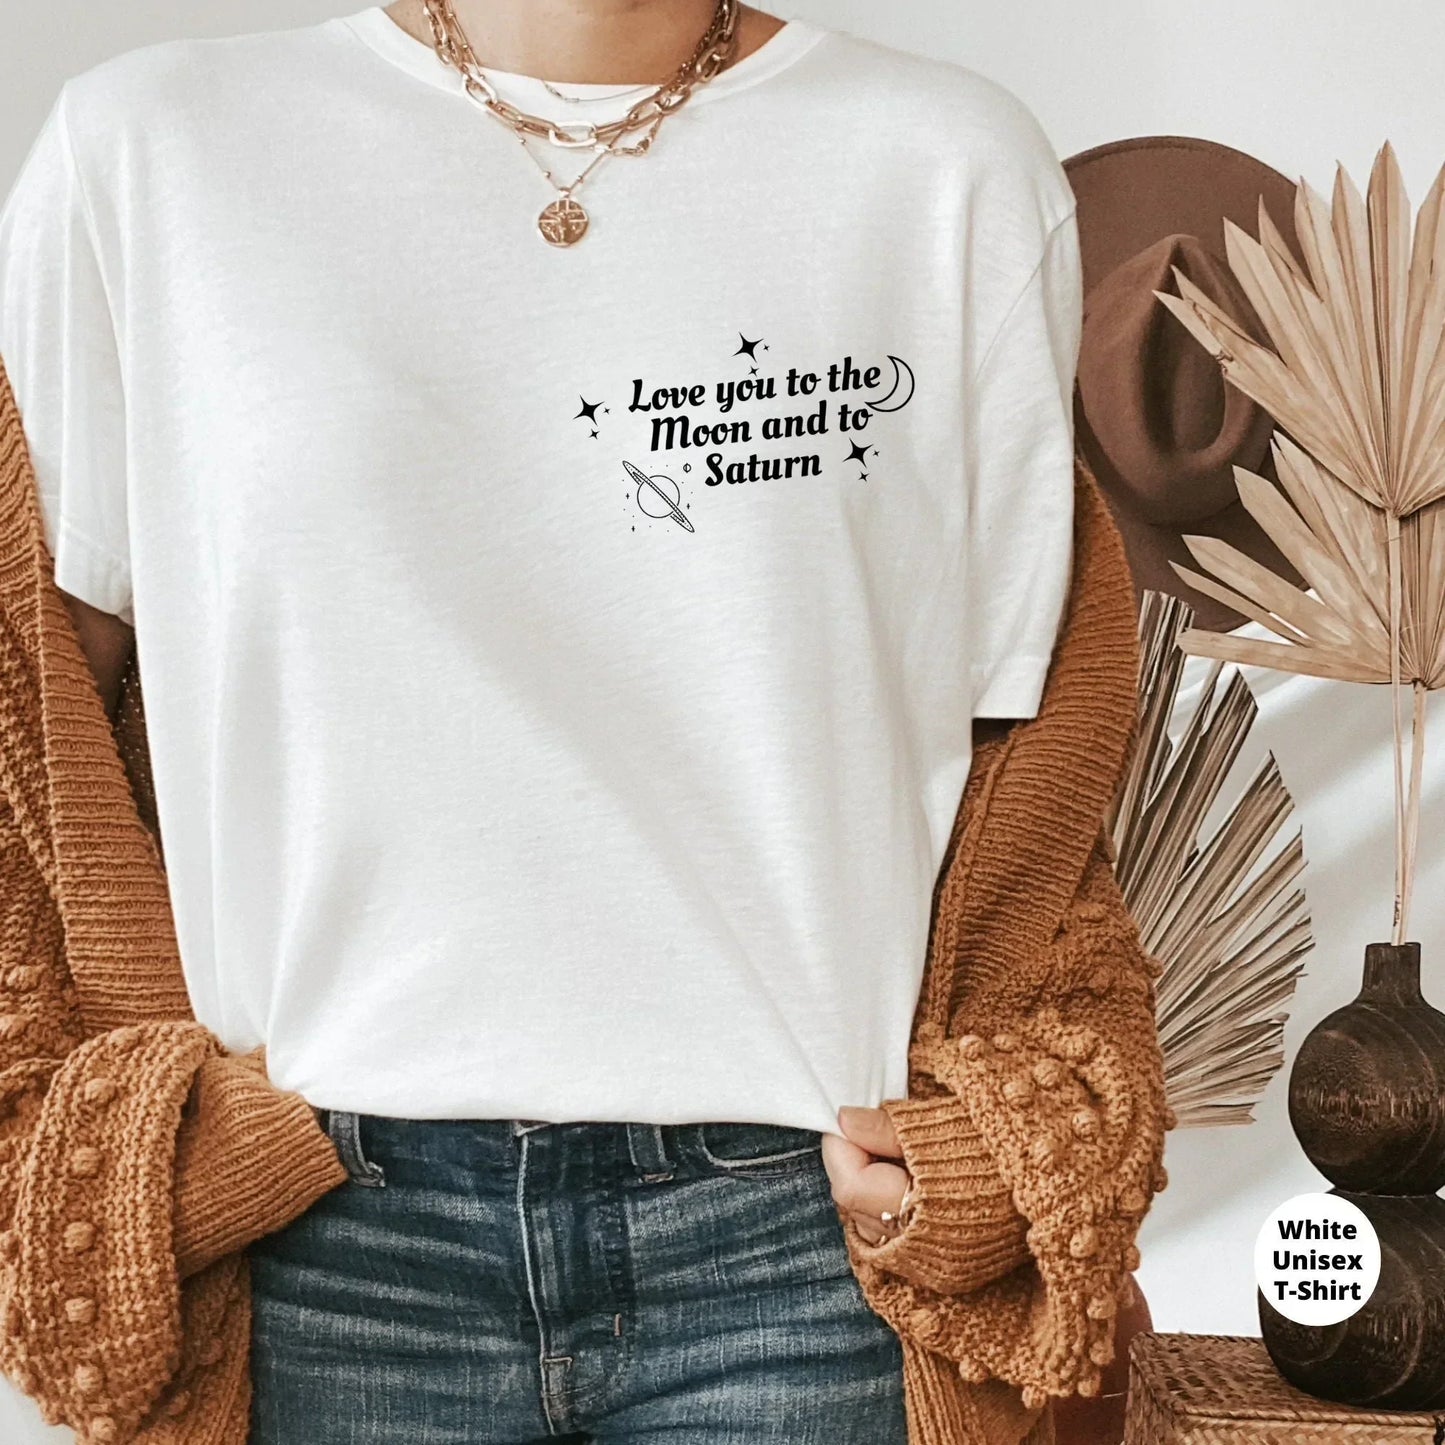 Love You to the Moon and to Saturn T-Shirt | Seven Shirt l Taylor Swift Seven Sweatshirt |Folklore Taylor Swift Inspired Hoodie Gift for Her